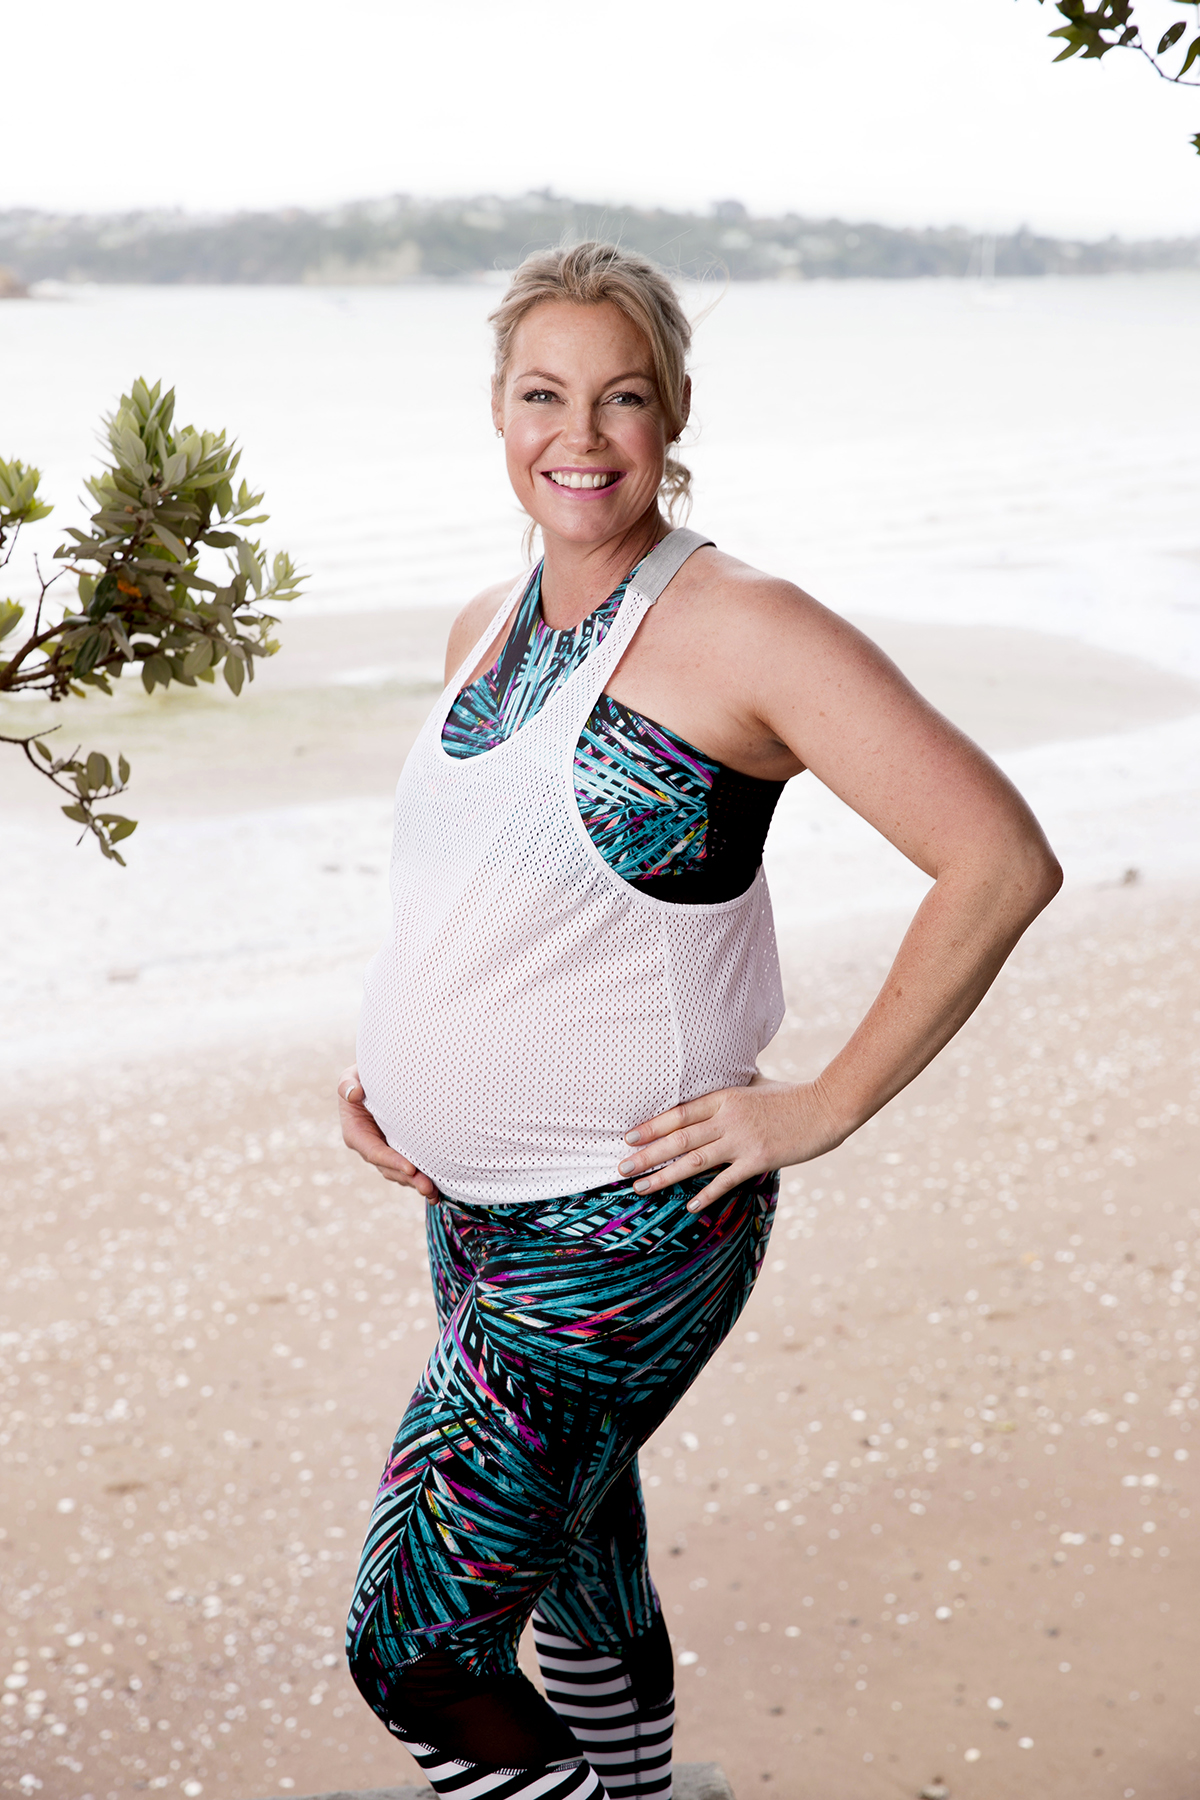 Mum-to-be Lee-Anne Wann’s home exercise hacks